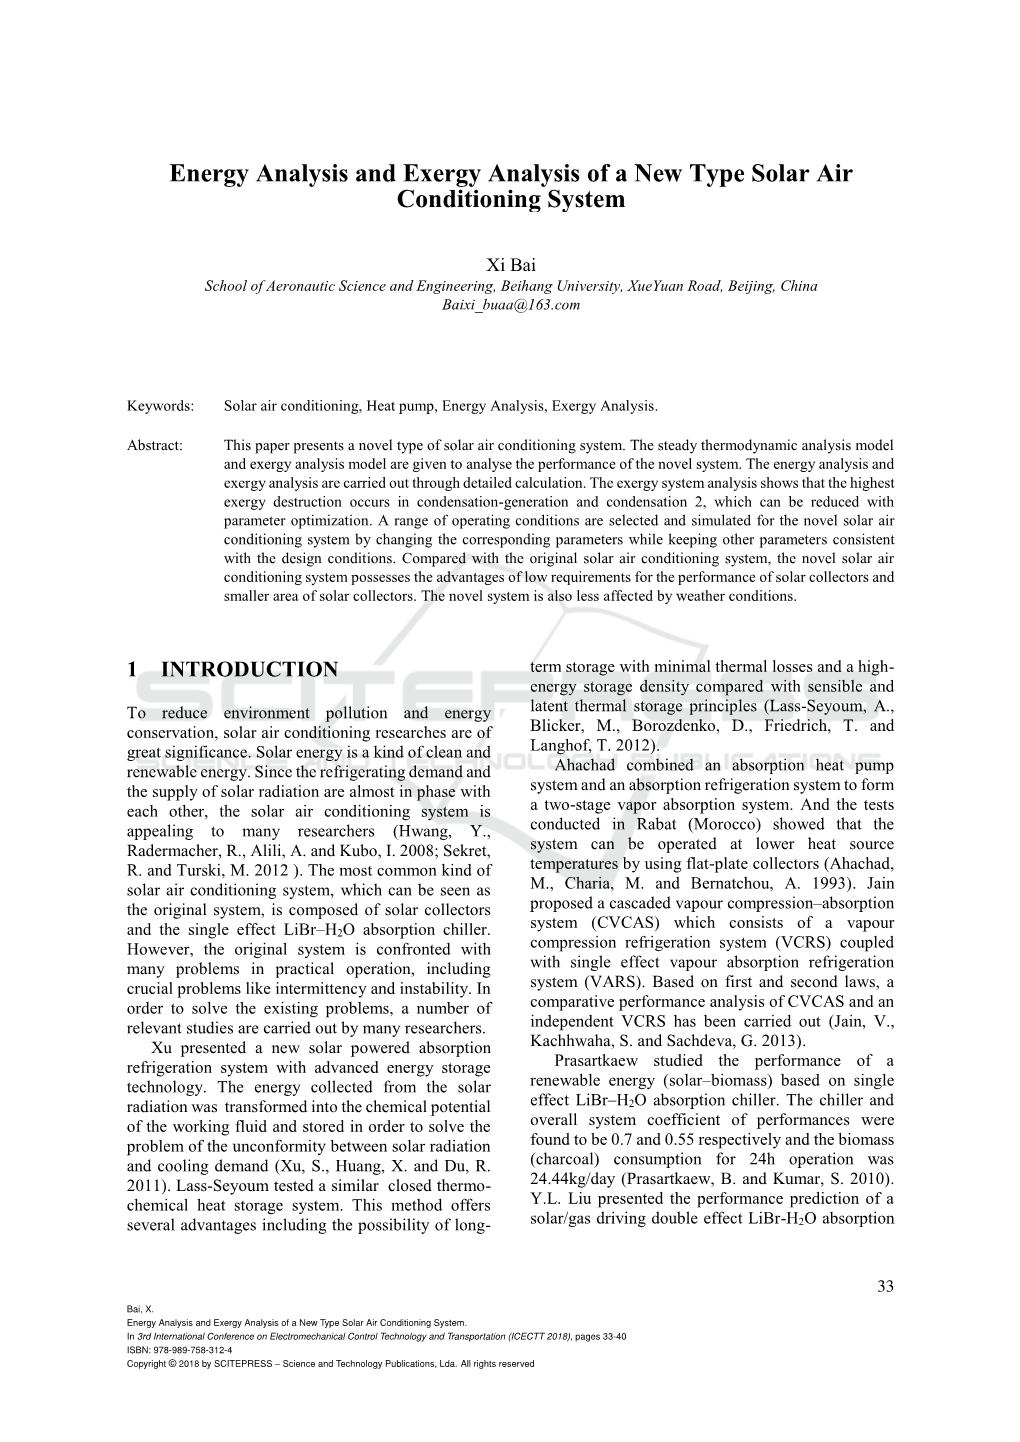 Energy Analysis and Exergy Analysis of a New Type Solar Air Conditioning System